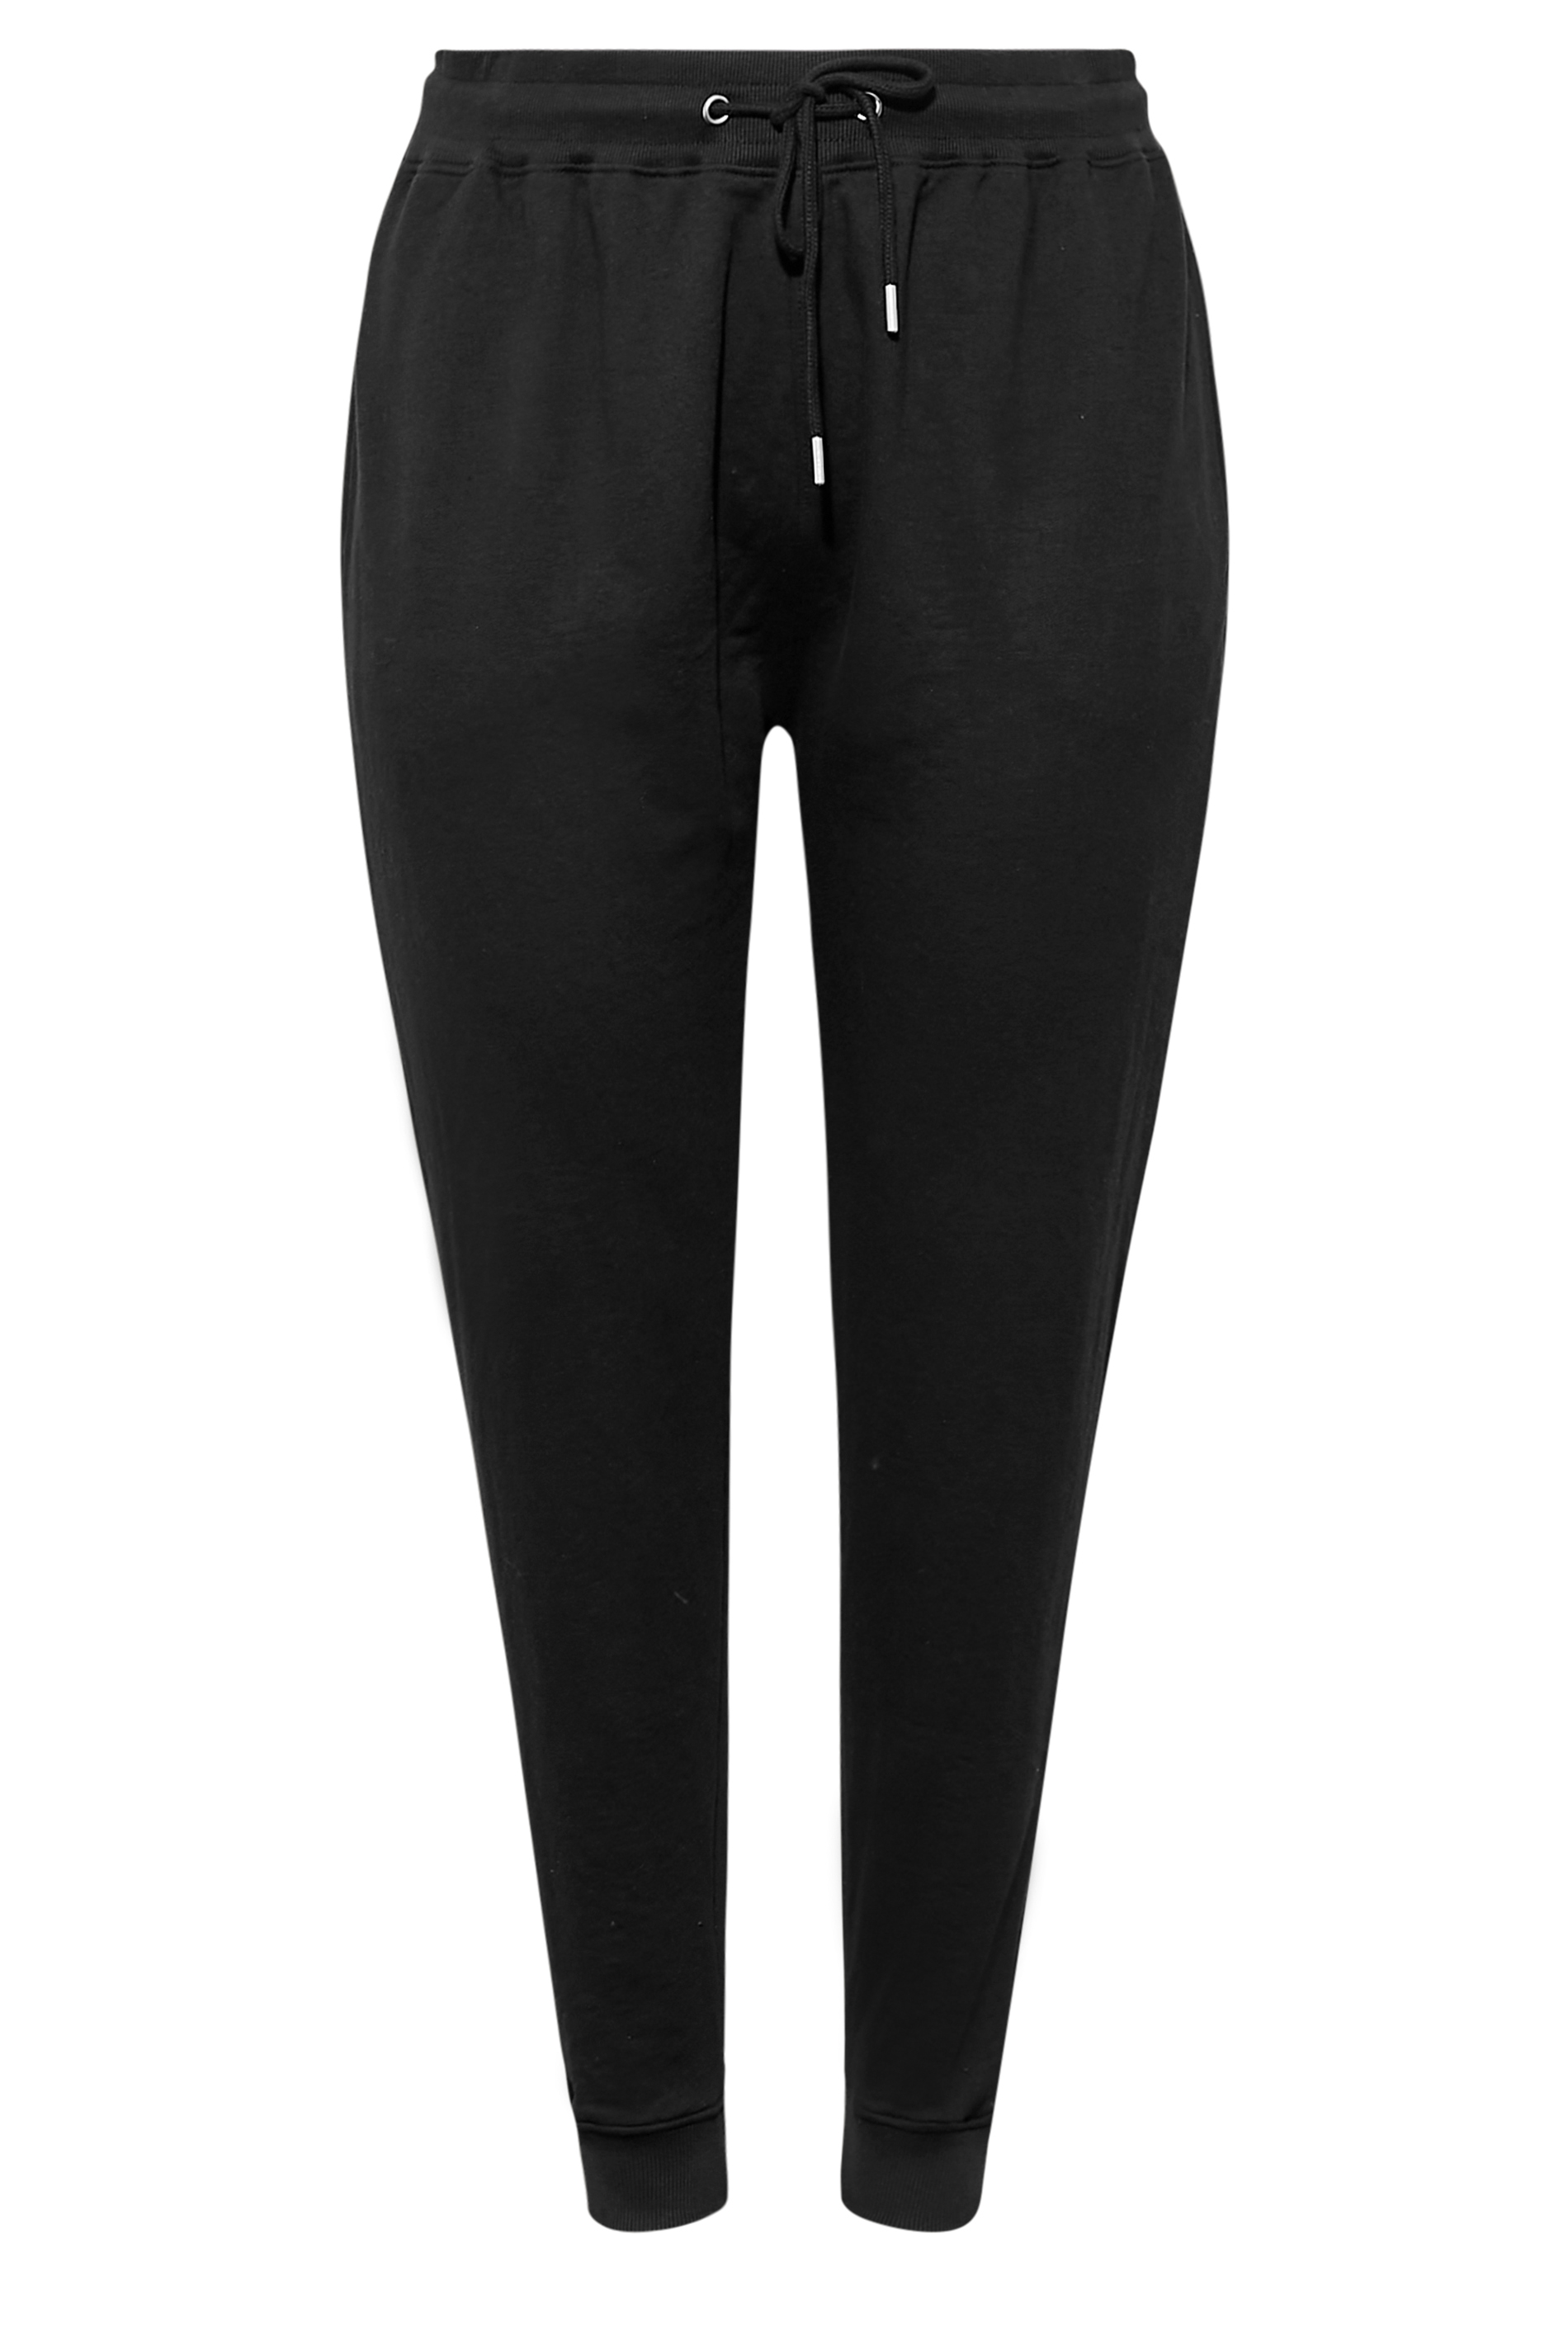 Basic Black Joggers – Style Me Luxe